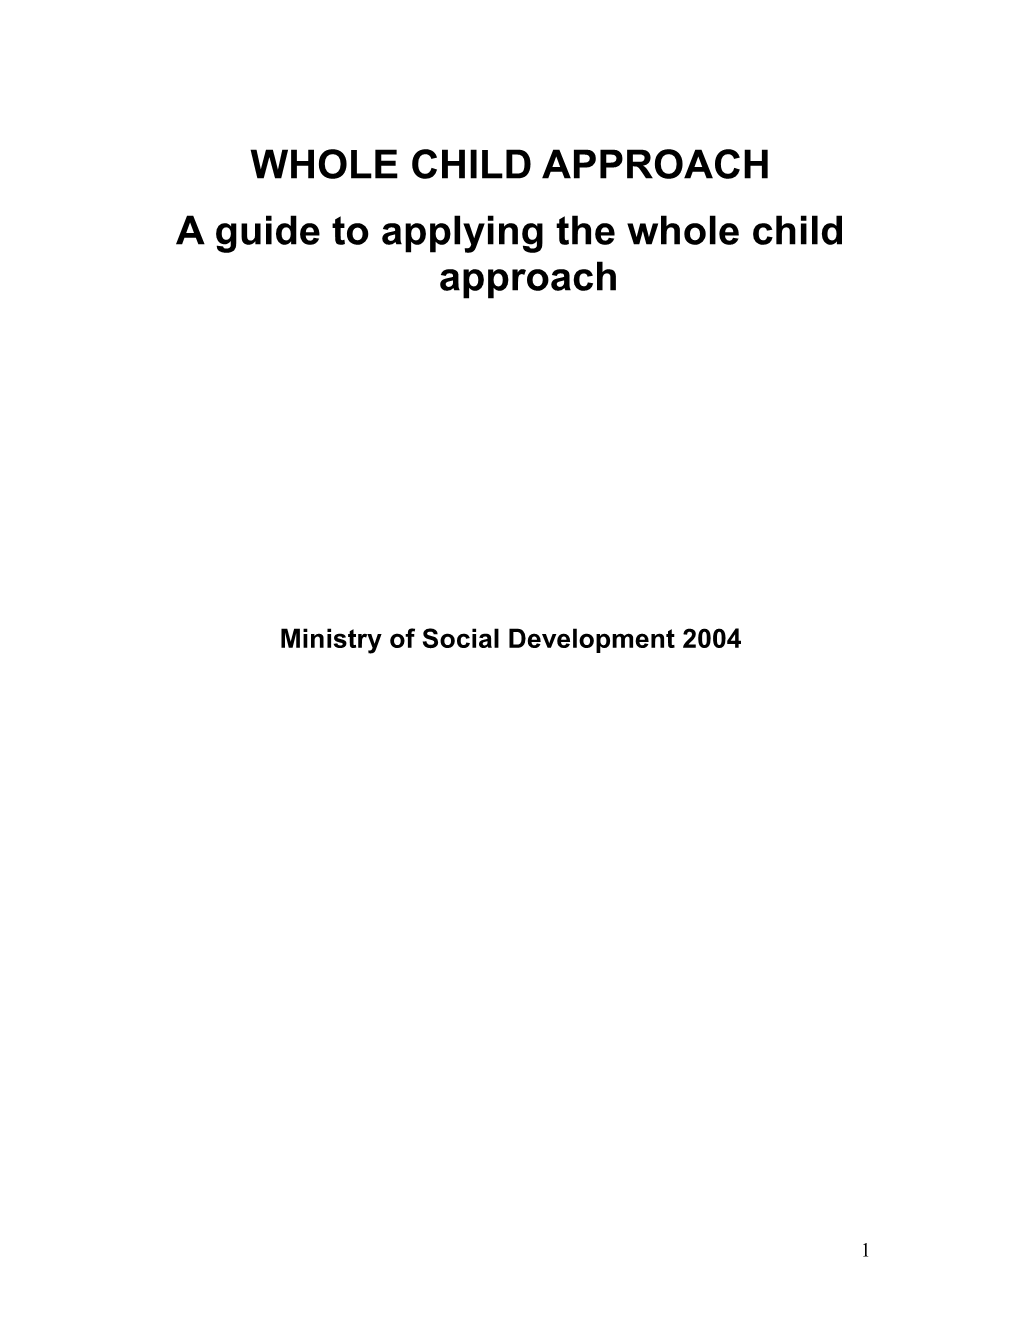 Guide to Applying the Whole Child Approach